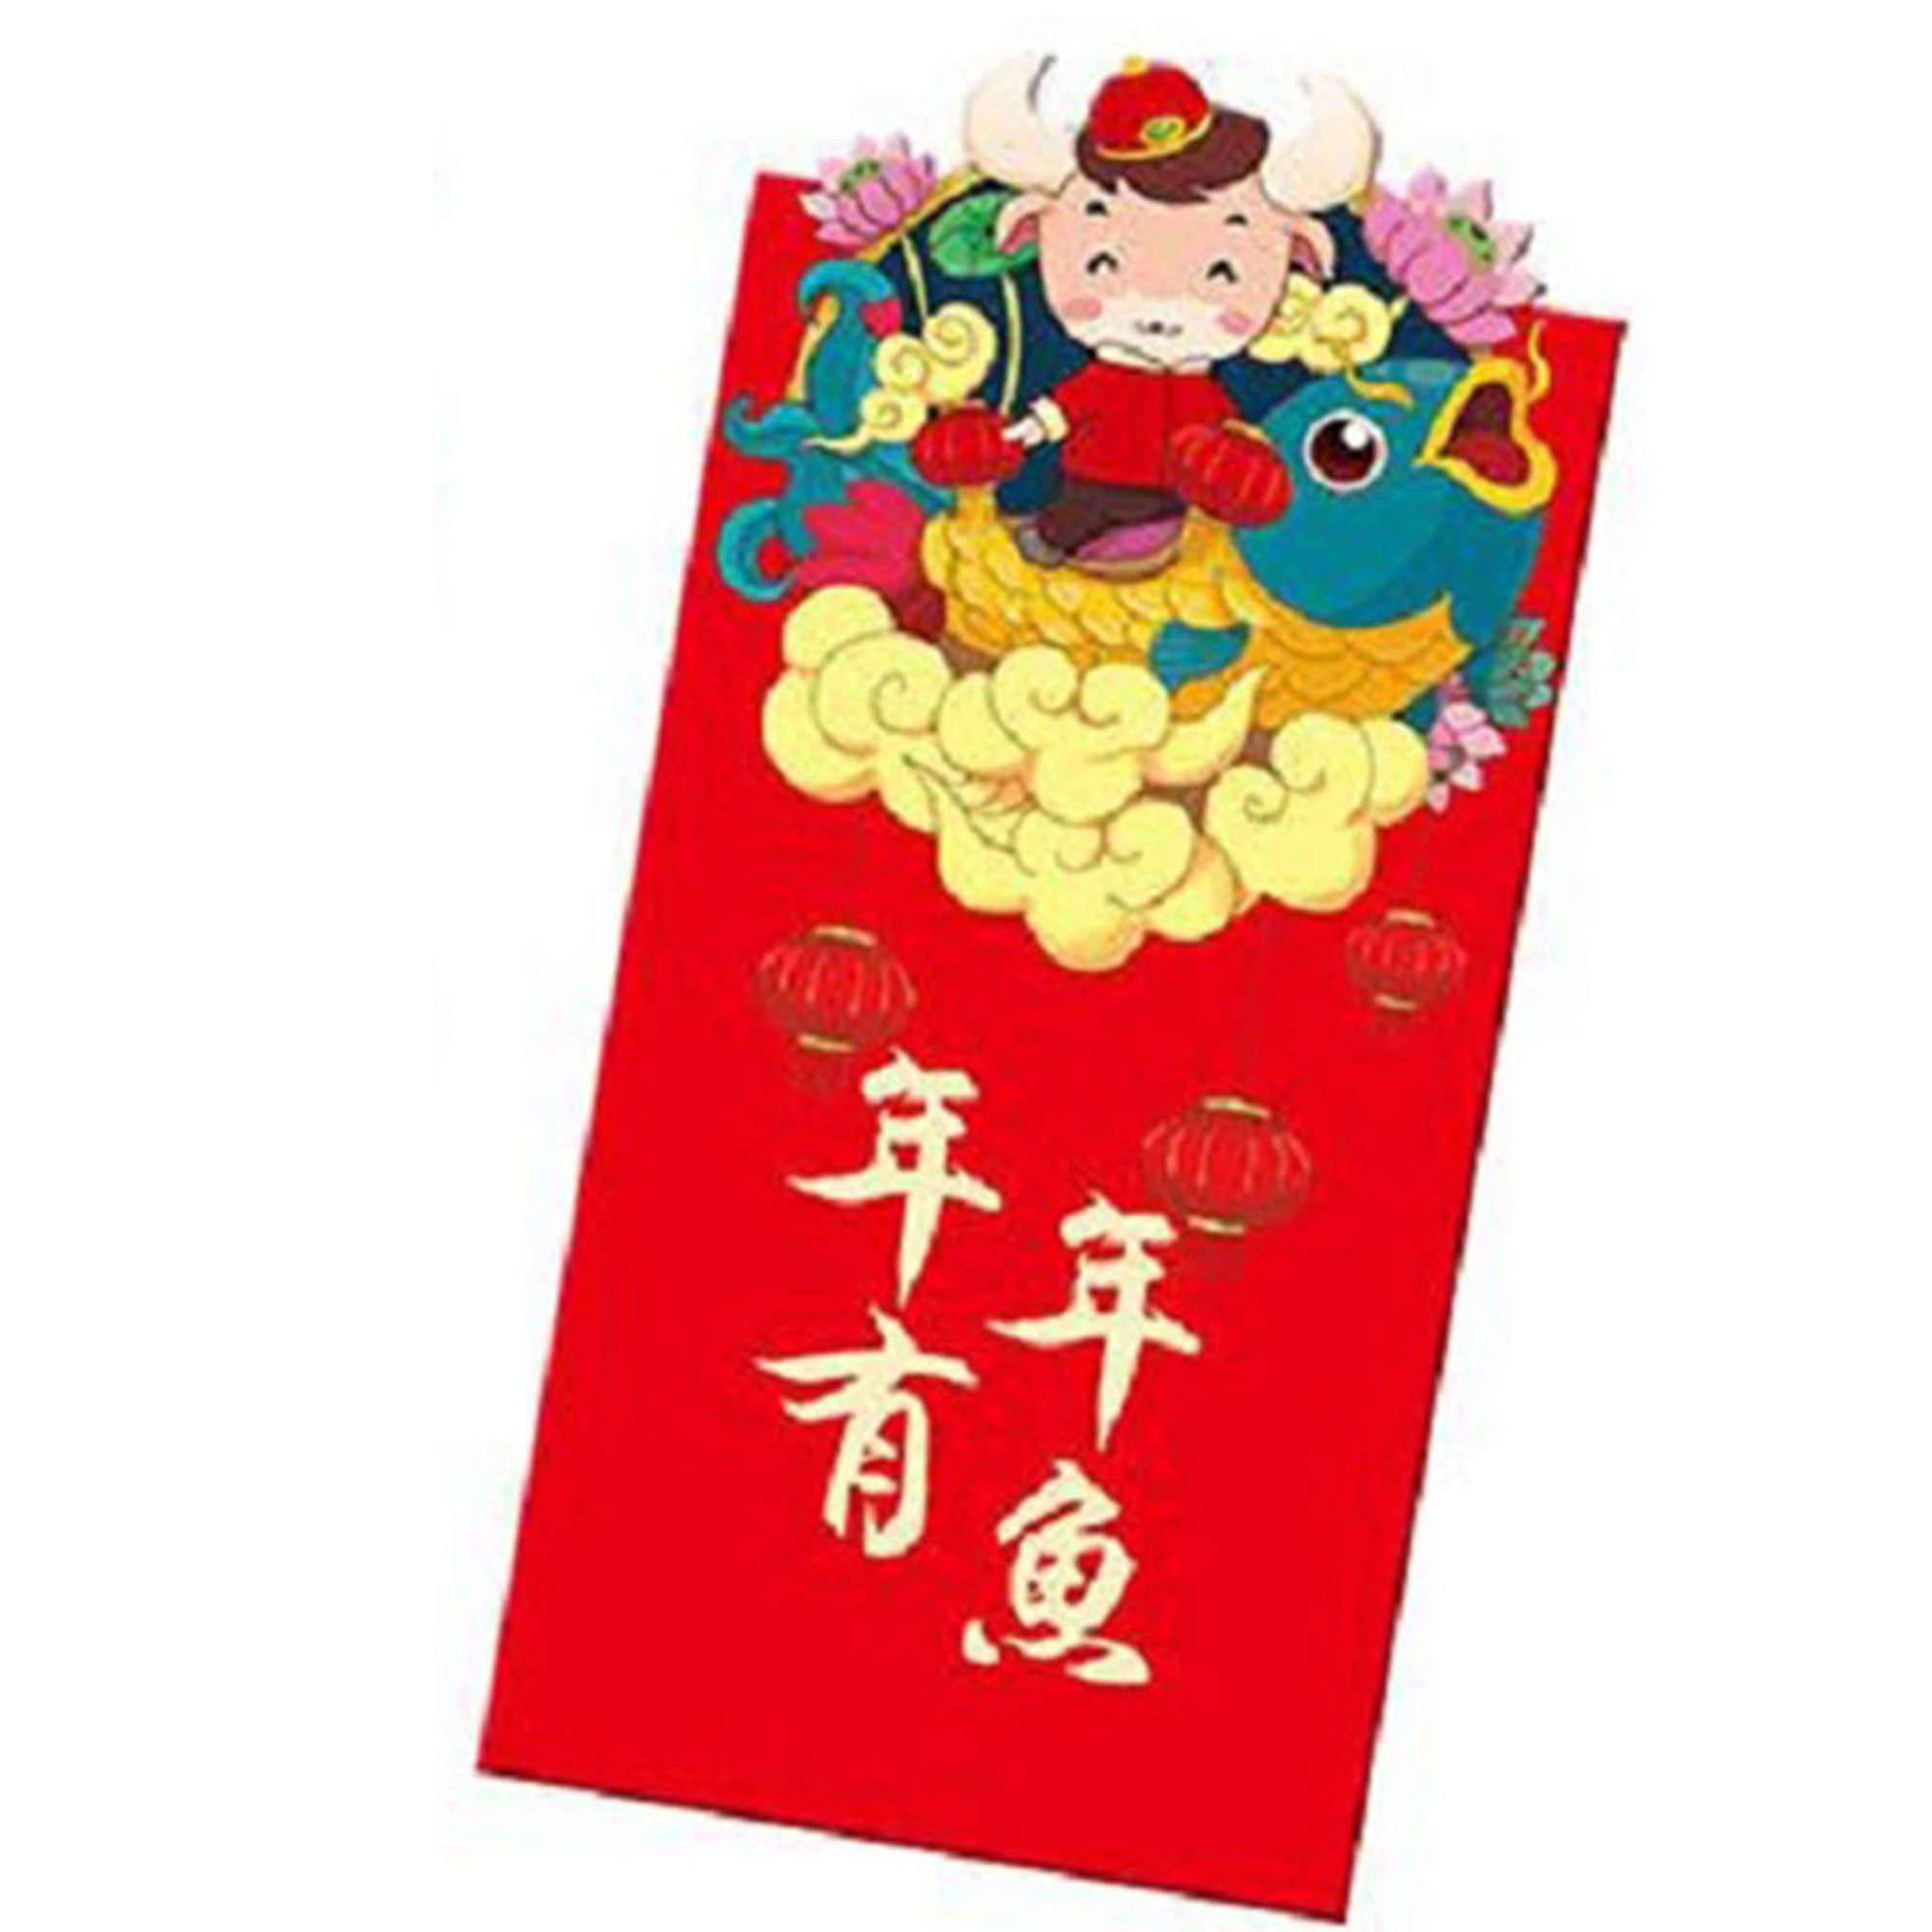  80pcs Chinese New Year Red Envelope Mini 2021 Zodiac OX Red  Packets Cartoon Chinese New Year Lucky Hong Bao for 2021 New Year Spring  Festival Party Wedding : Office Products